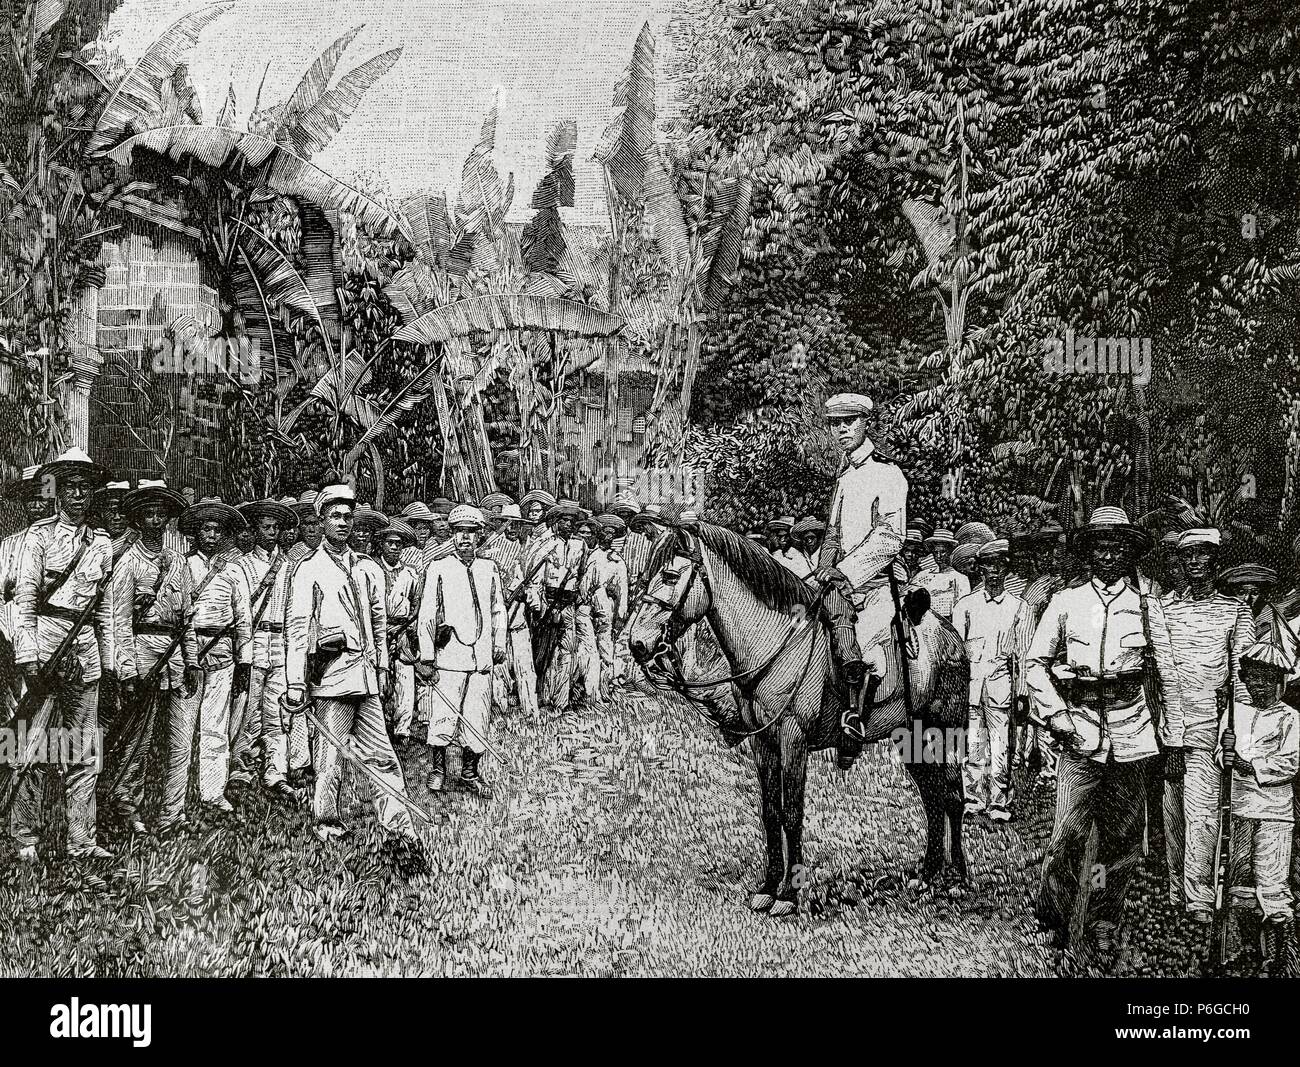 Philippine War of Independence. Officers and soldiers of the Tagalog army. Engraving of 'The Artistic Illustration,' 1899. Stock Photo